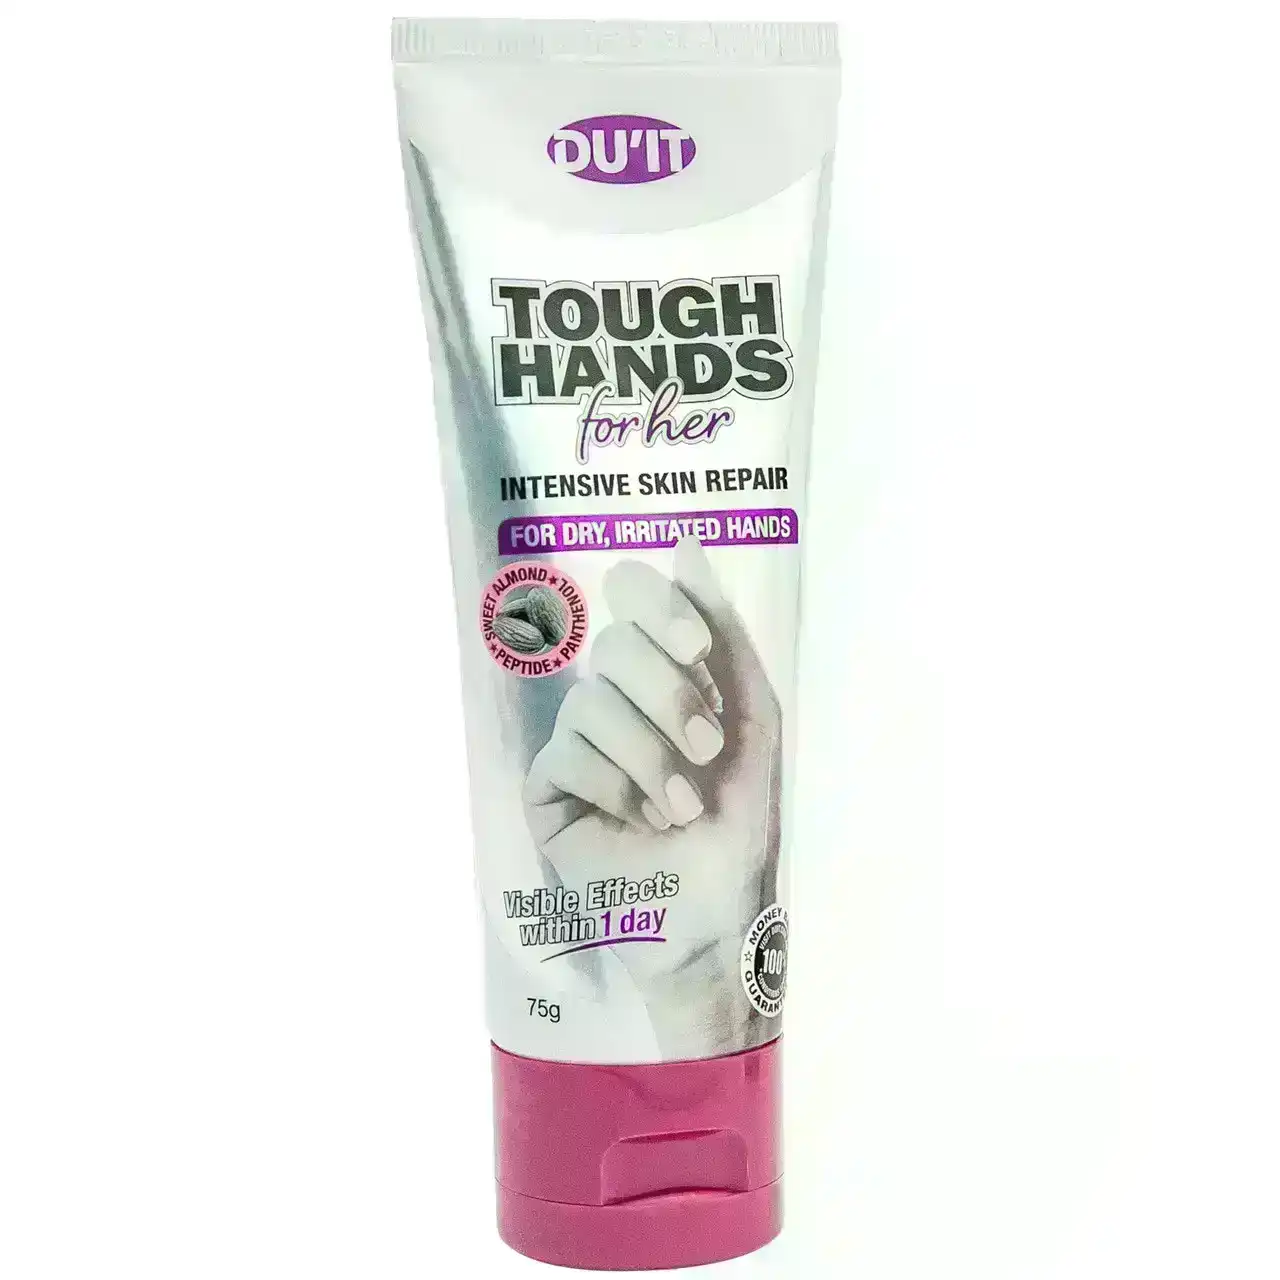 DU'IT Tough Hands For Her Anti-aging Hand Cream 75g